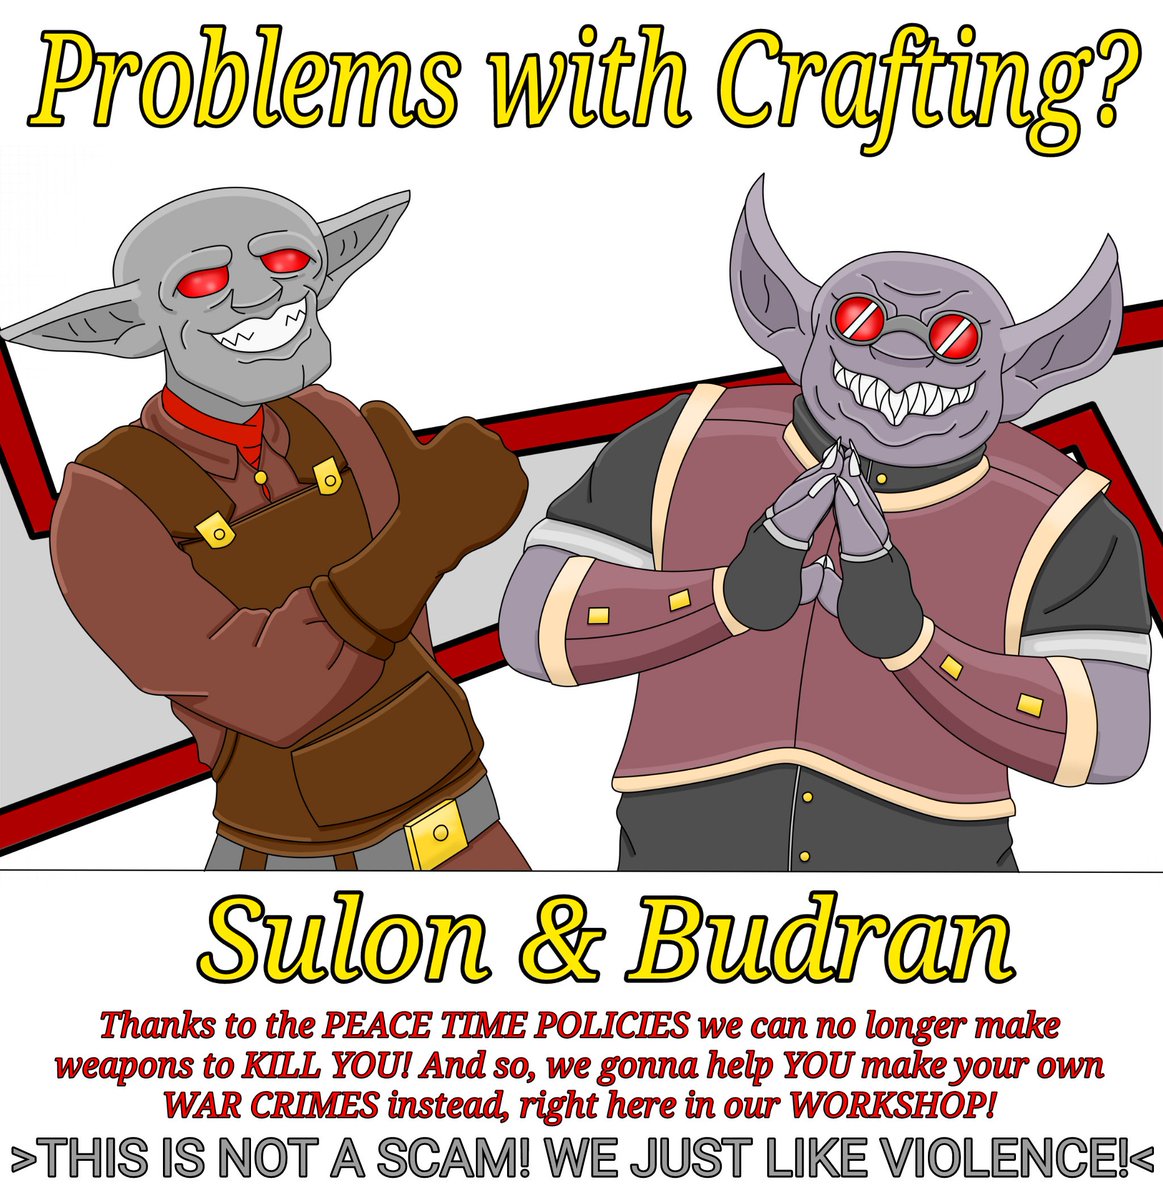 Unsatisfied with the crafting rules? These two reduce the time to craft items by 2 days! (Just don't tell Paizo about it)

#pathfinder2e #pf2e #pf2meme